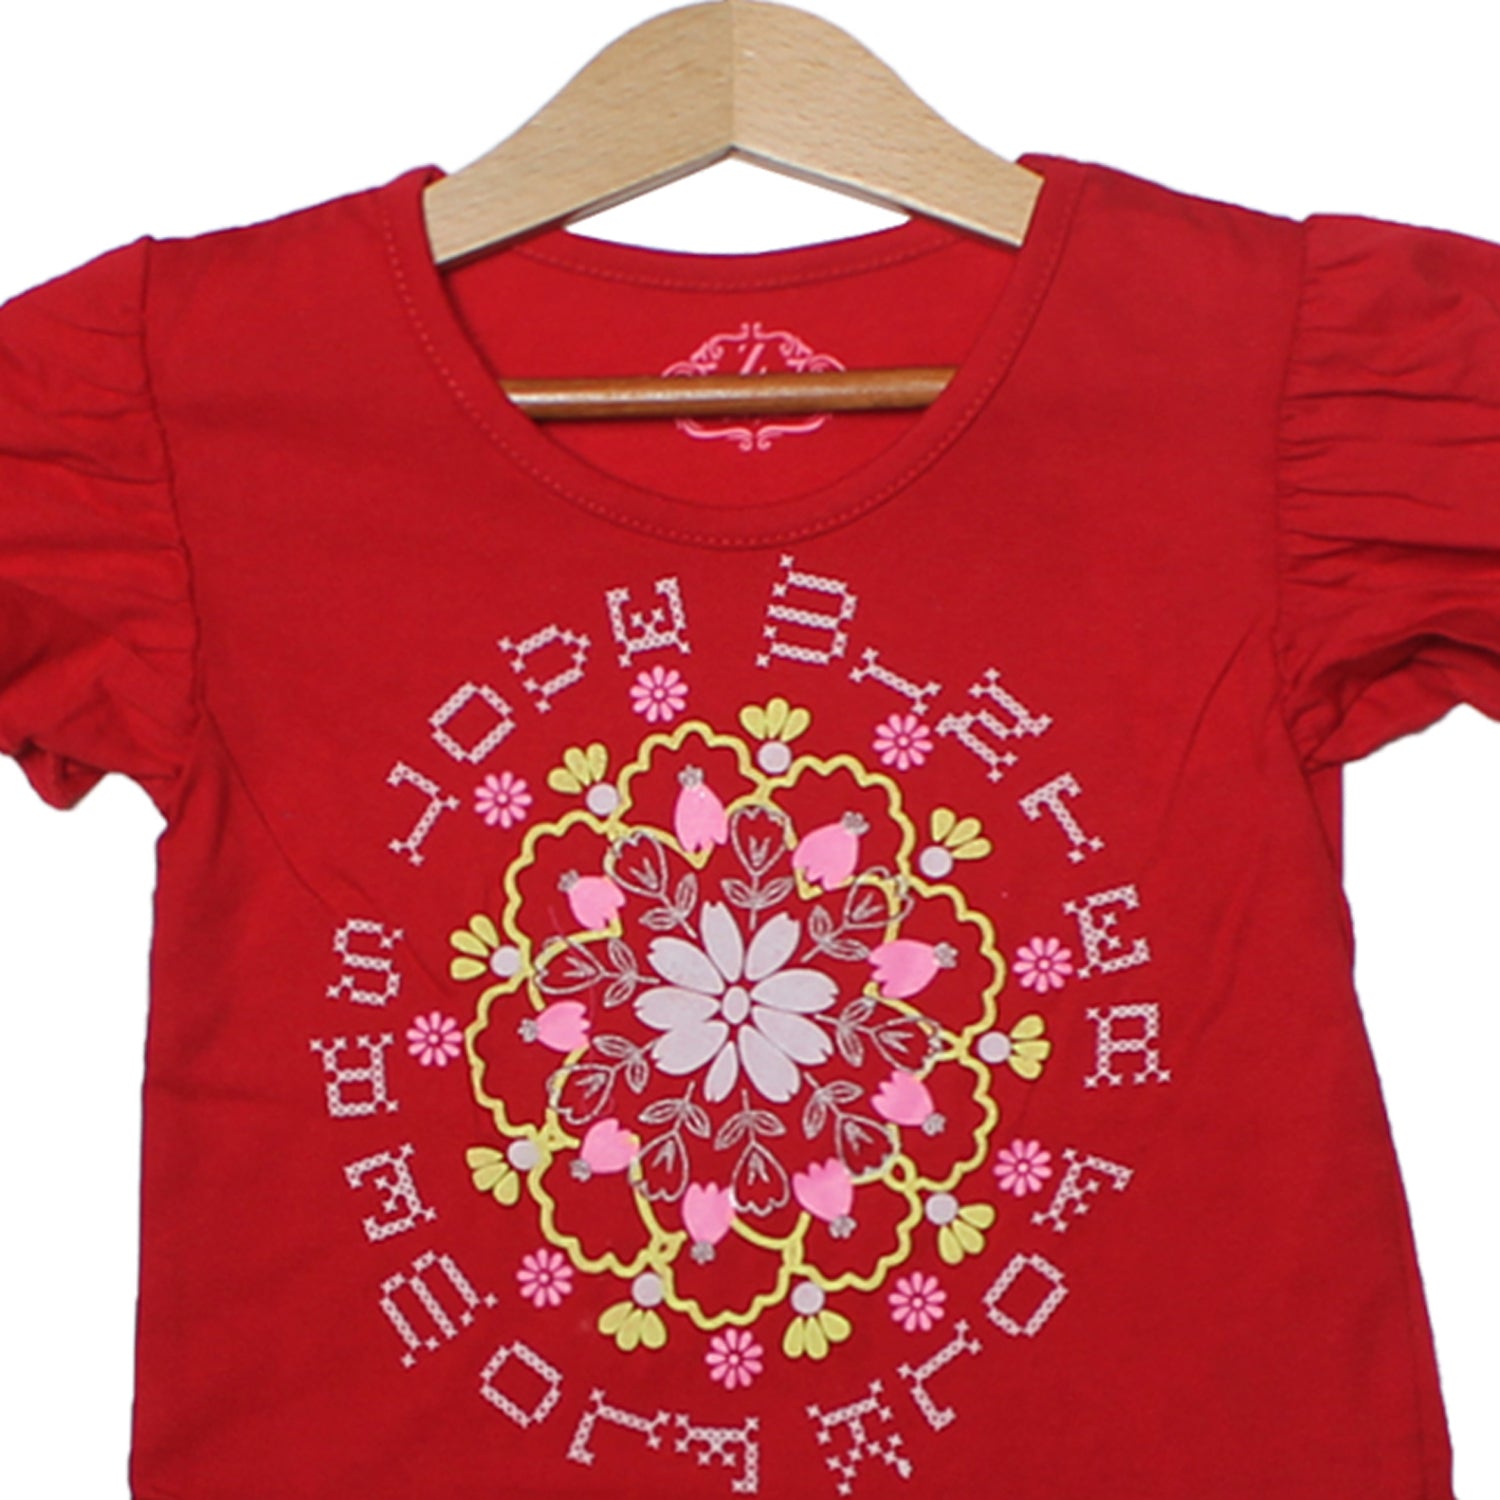 NEW RED ROUND FLOWER PRINTED T-SHIRT TOP FOR GIRLS